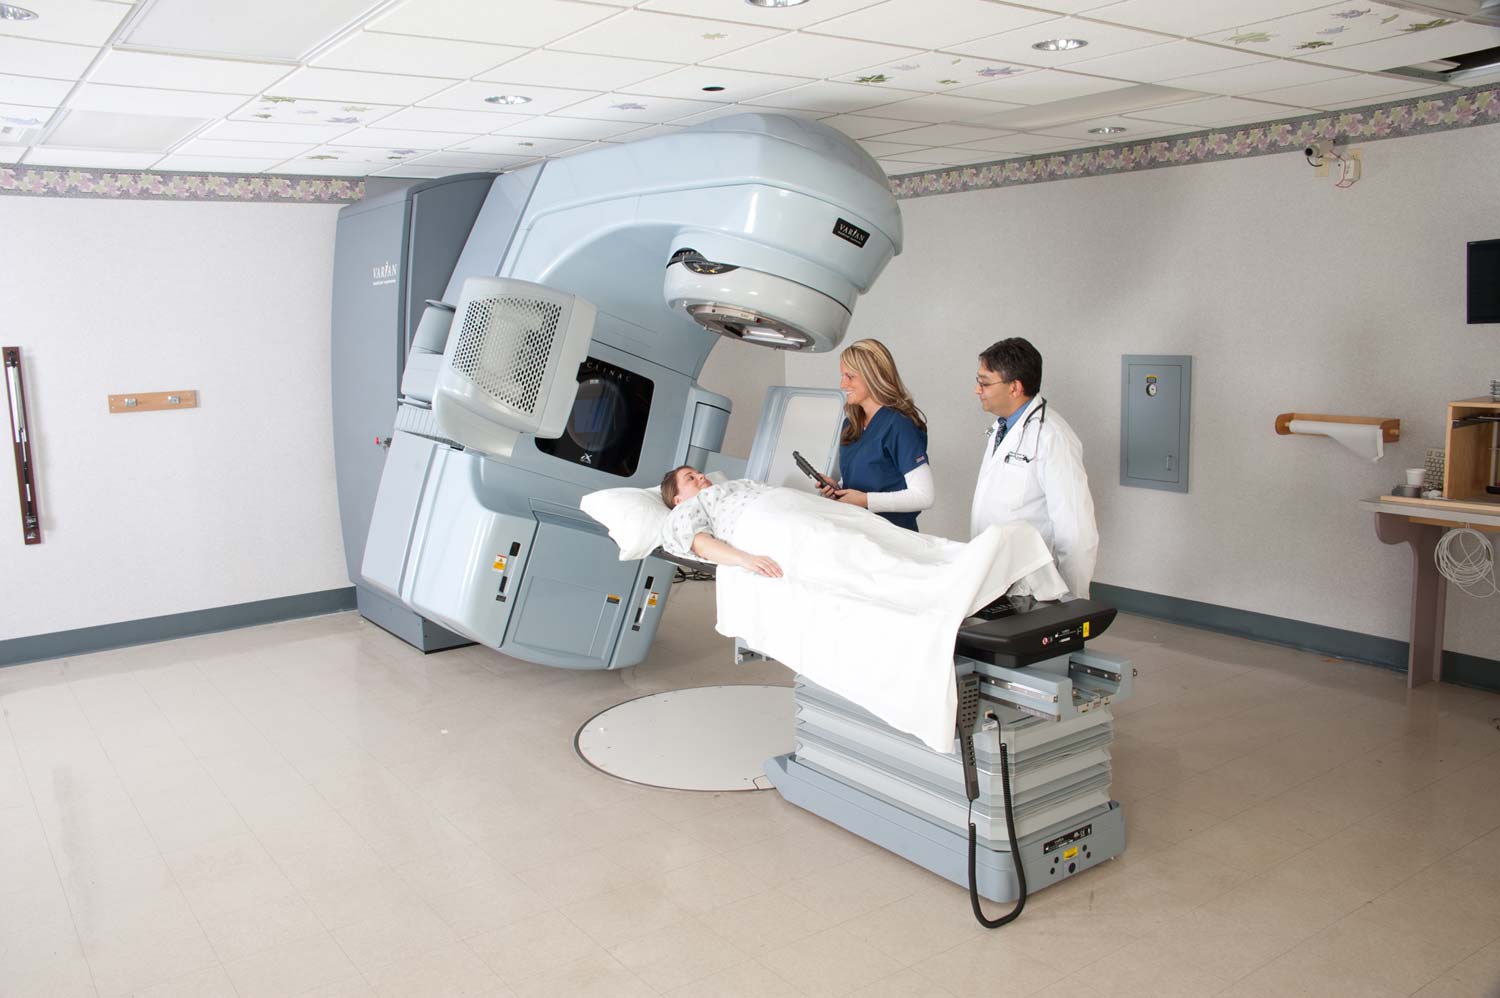 Radiation Oncology Center